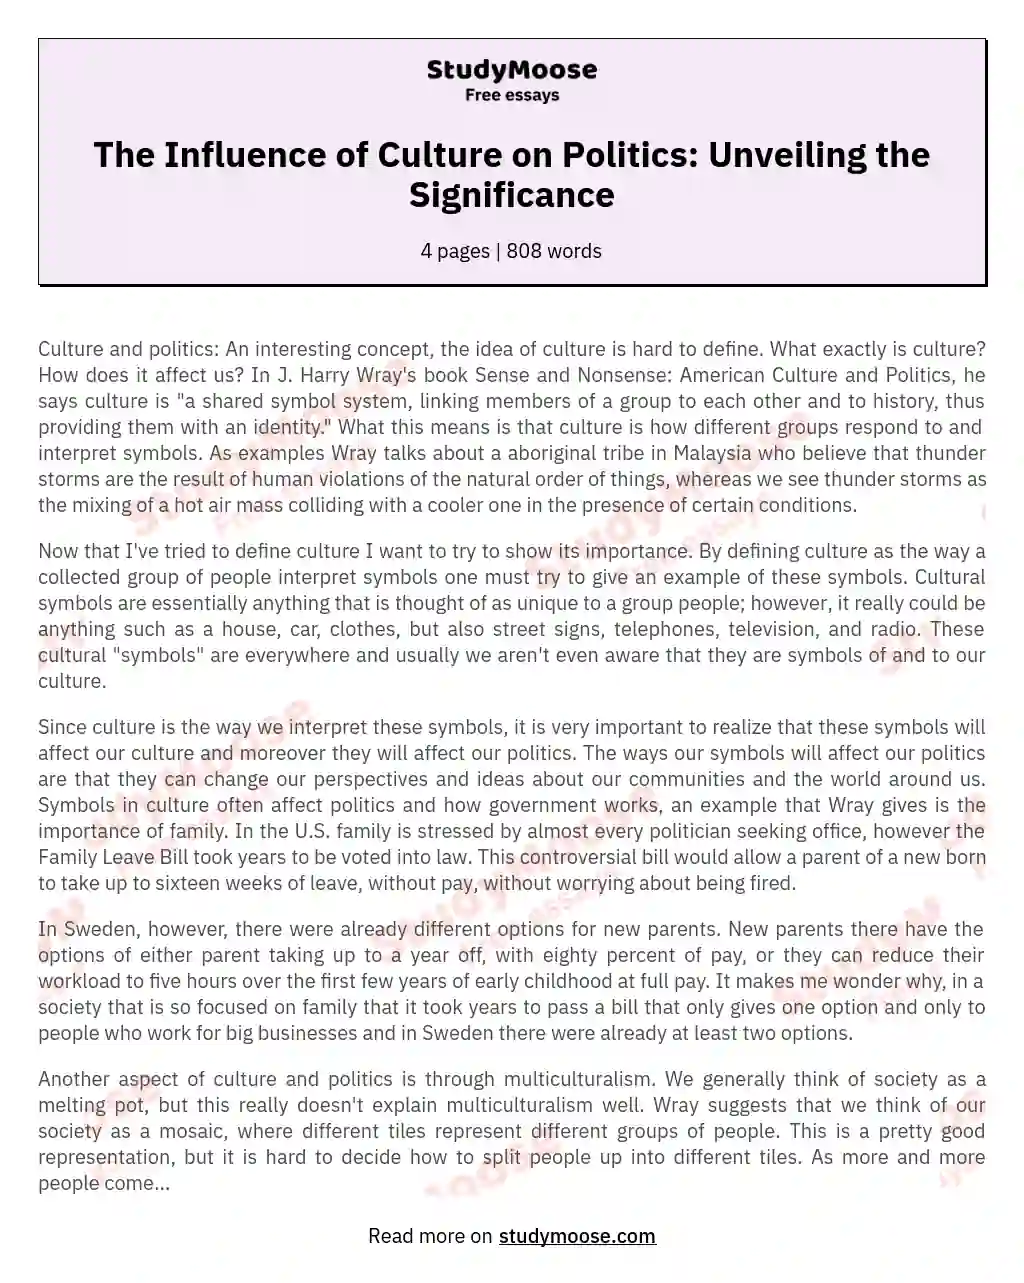 The Influence of Culture on Politics: Unveiling the Significance essay